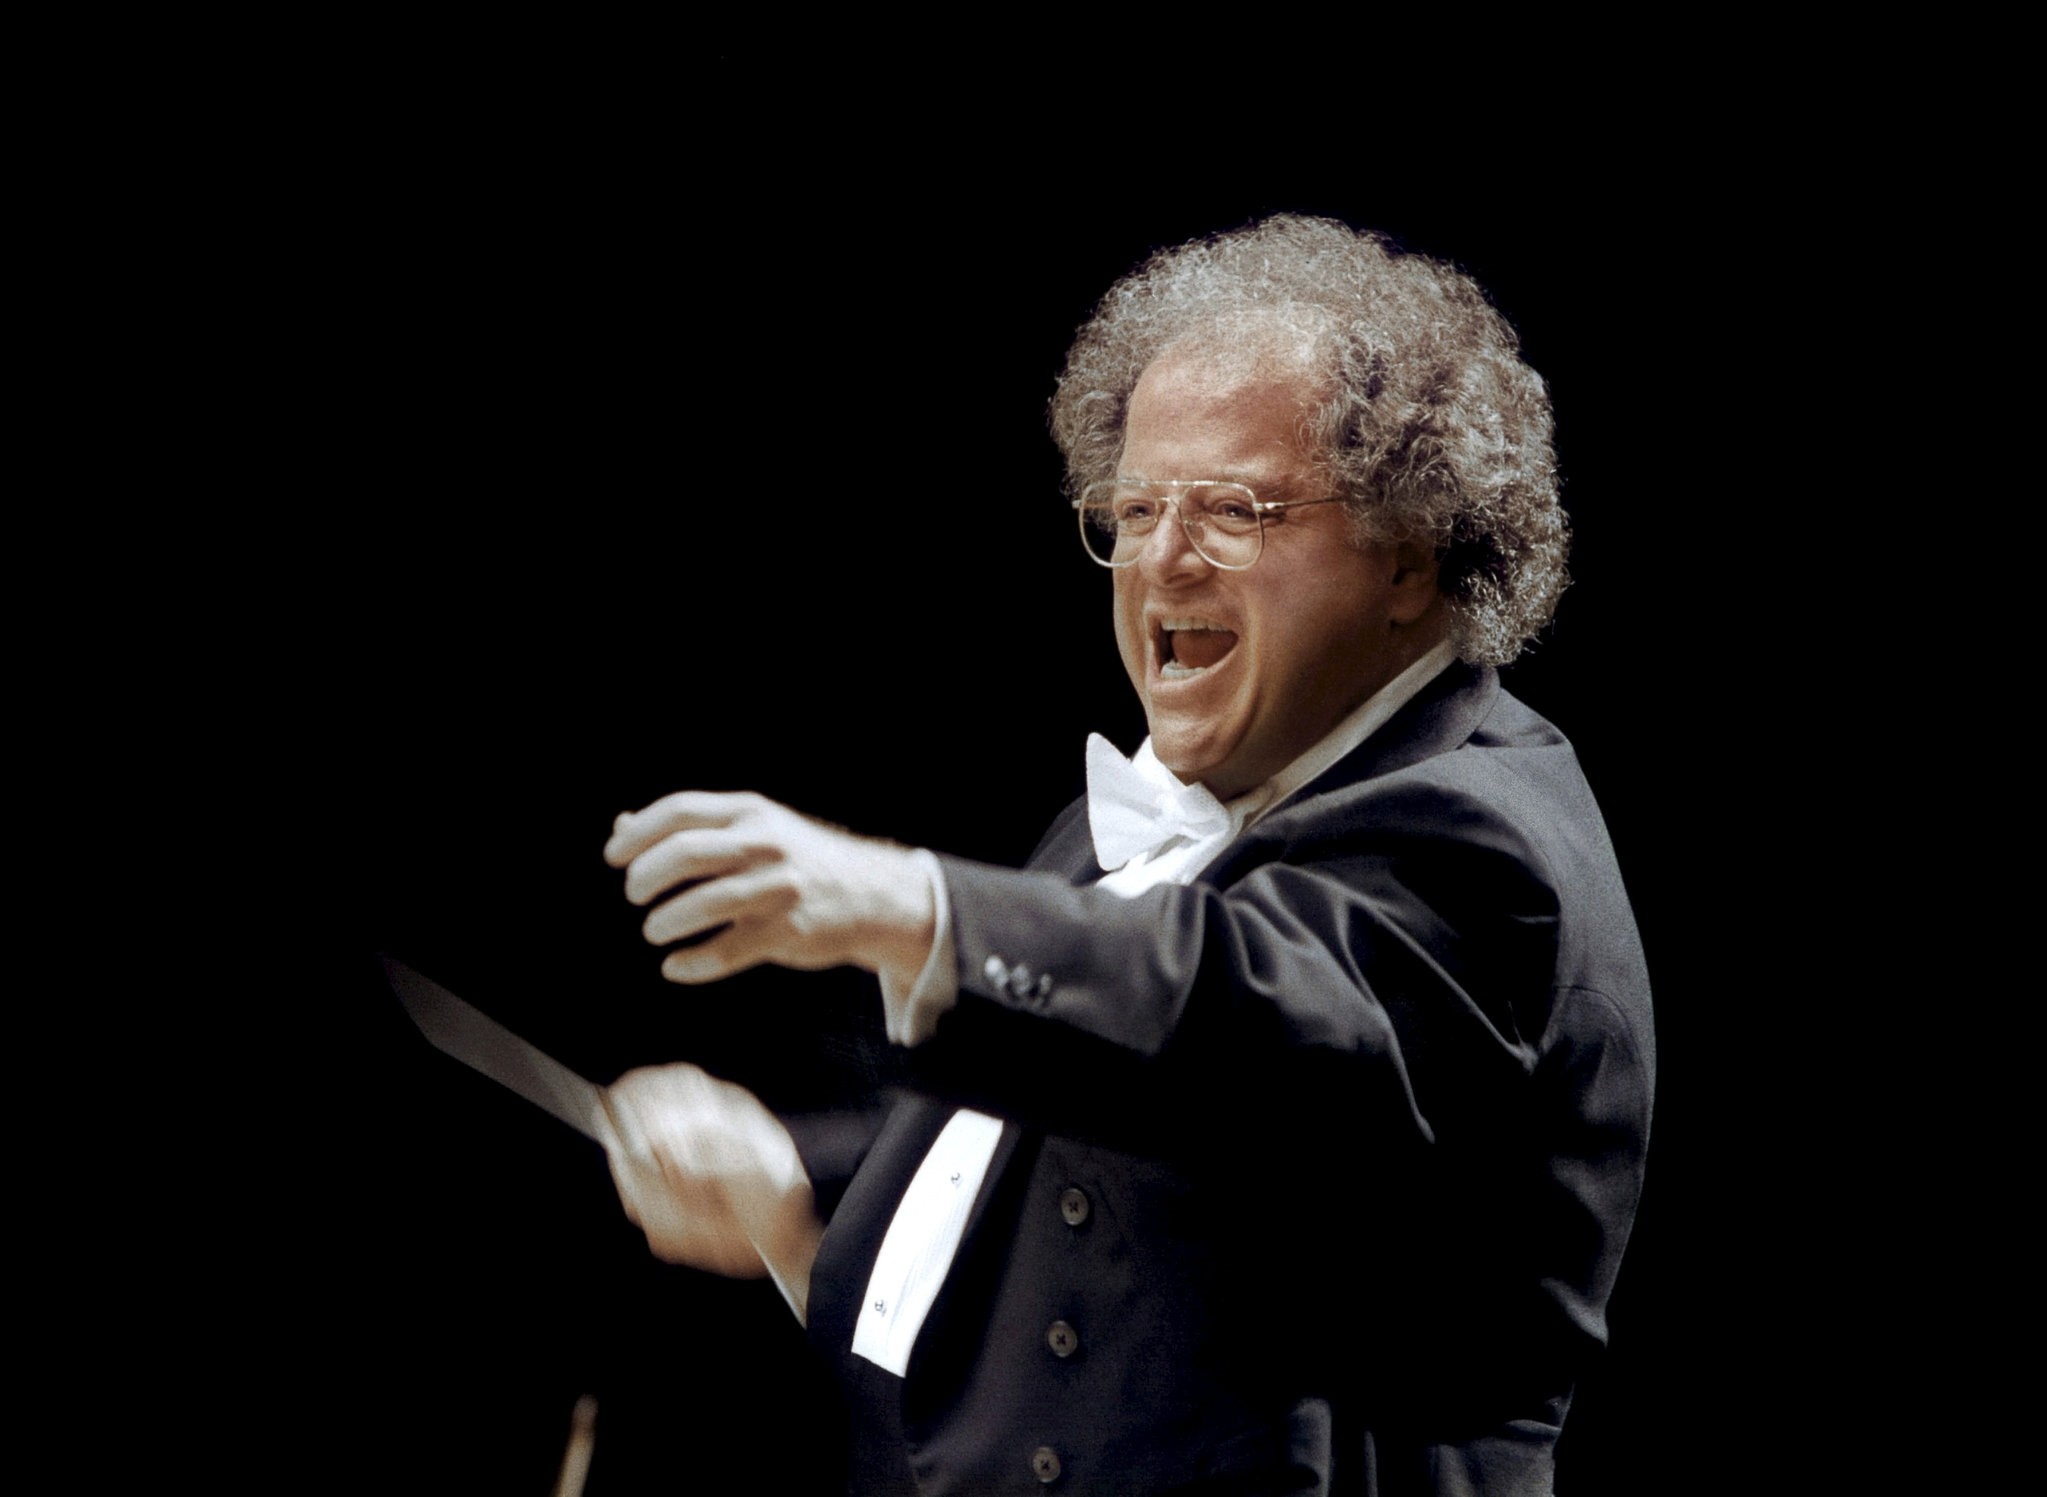 Metropolitan Opera (MET) musical director James Levine is shown in Japan in this 2001 photo provided by the MET April 14, 2016. (REUTERS Photo)